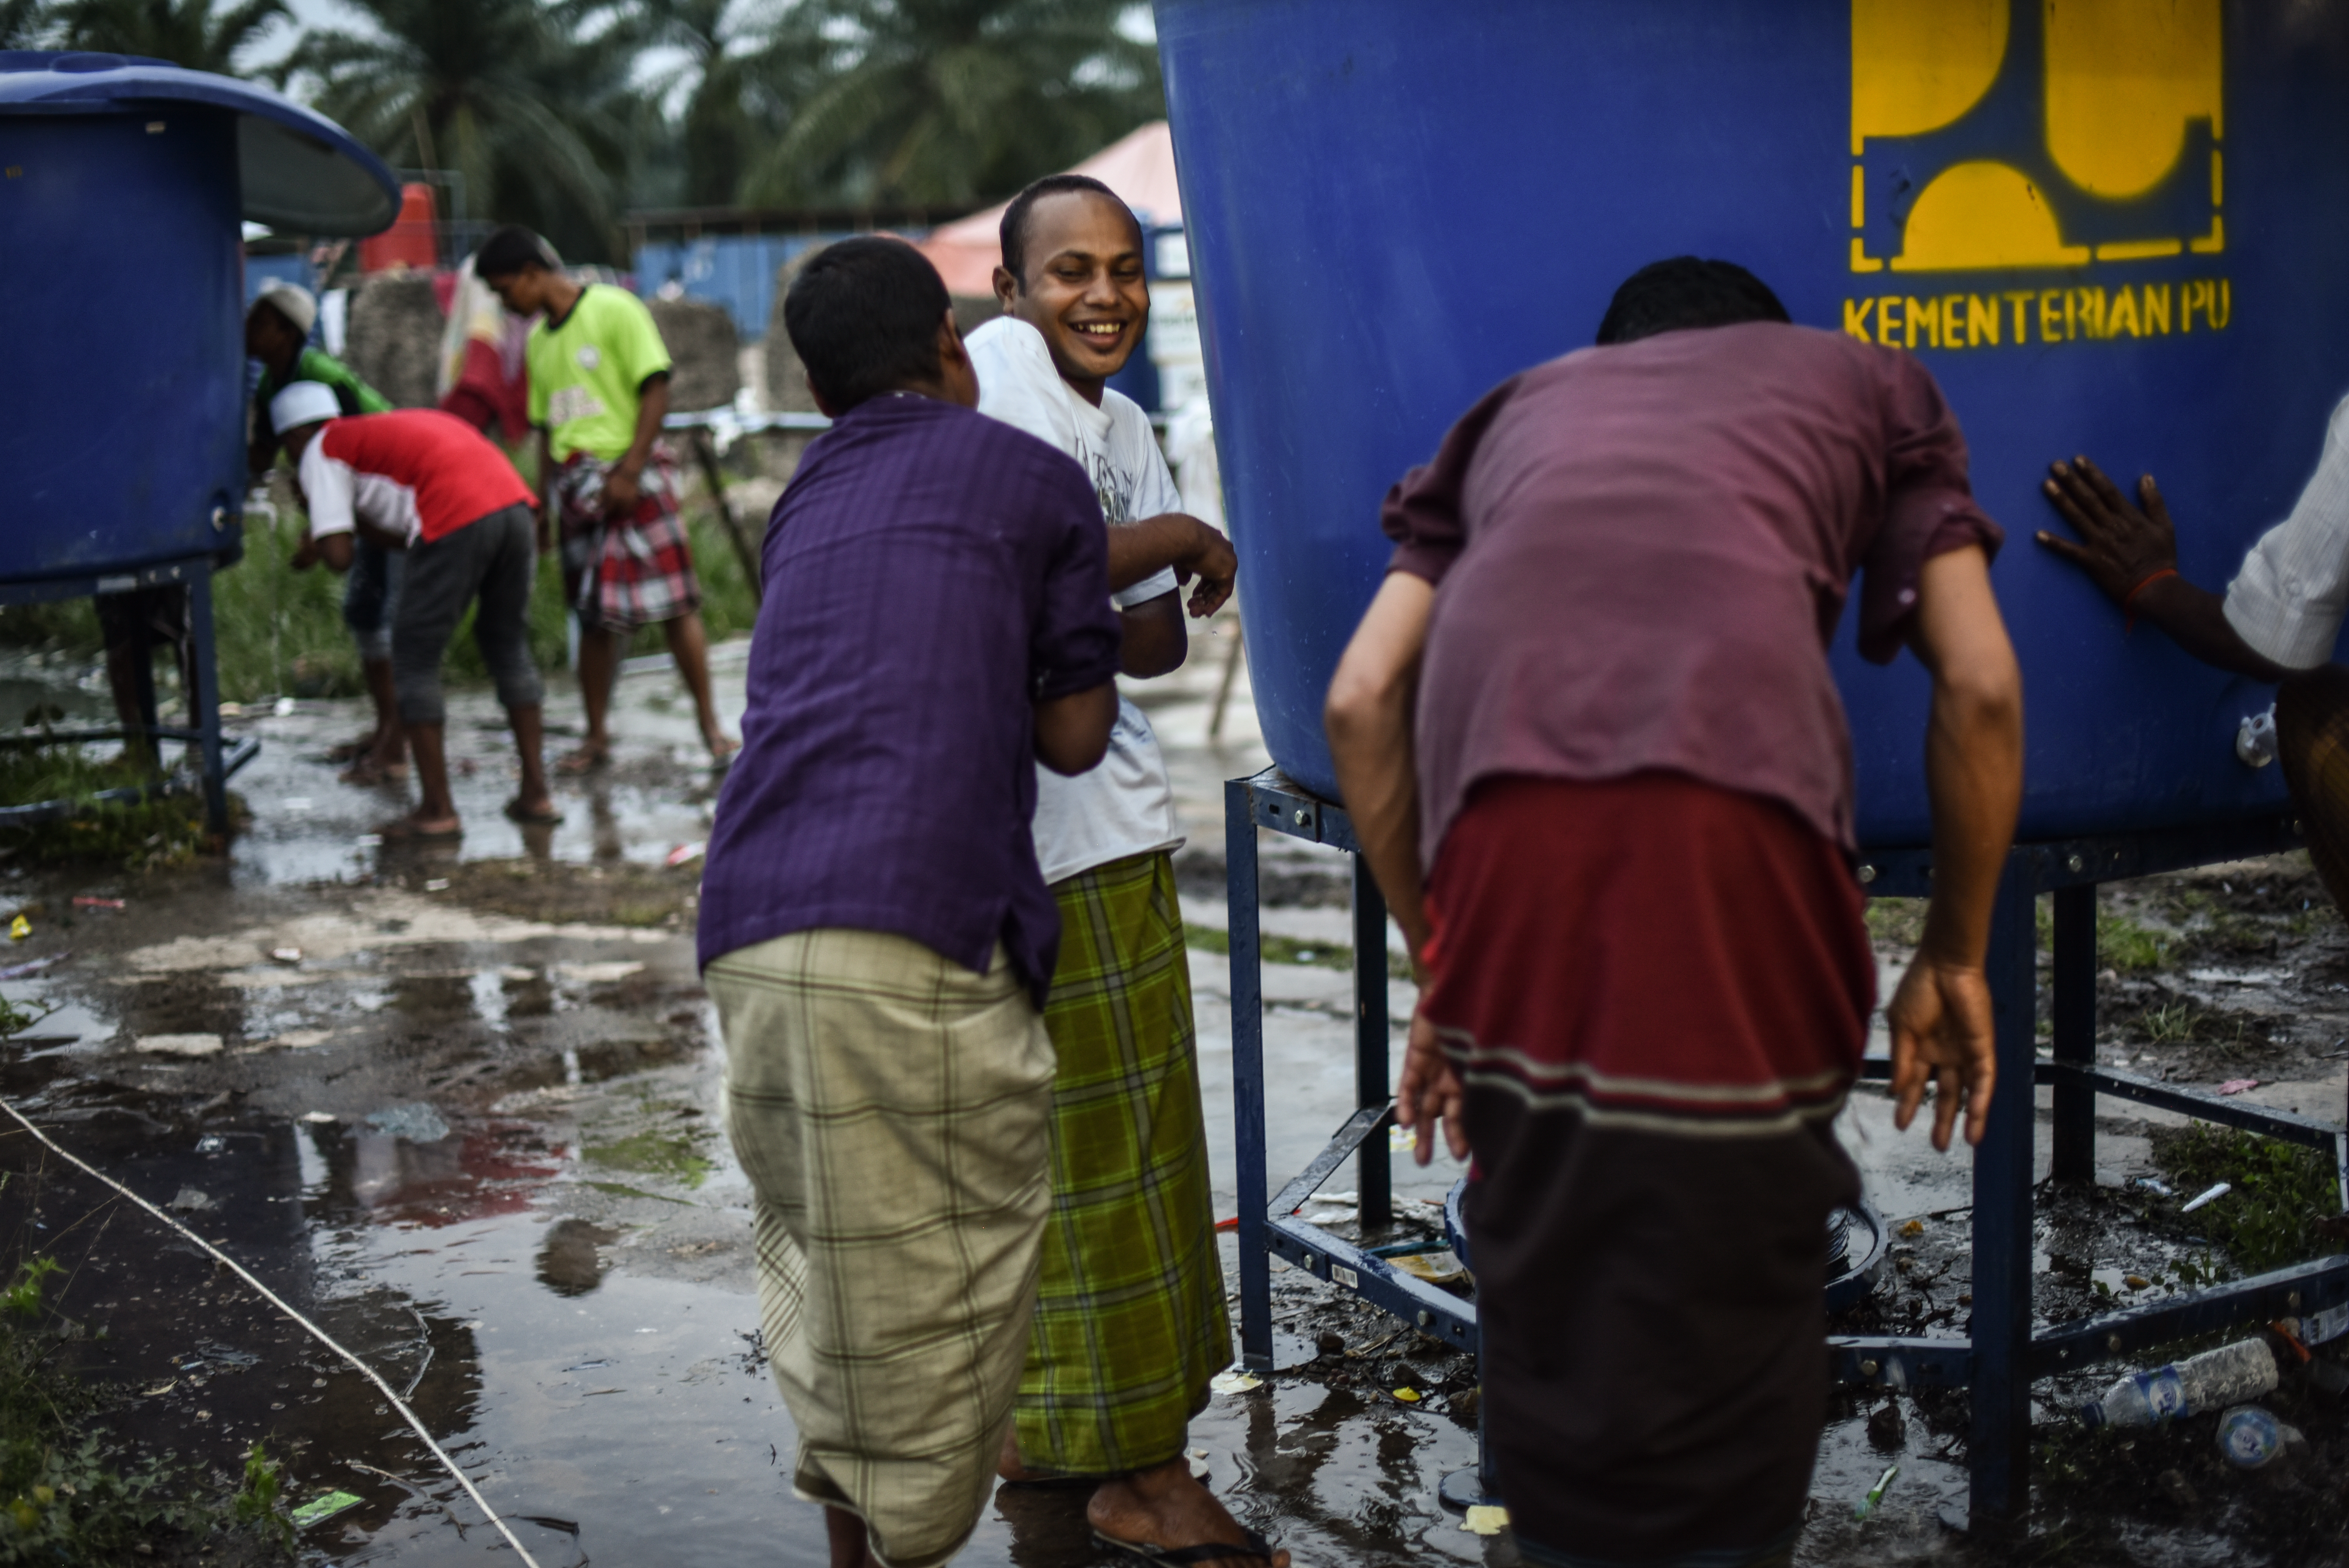 Muslim refugees wash before evening prayer at the Bayeun, East Aceh, Indonesia refugee camp on July 19, 2015.